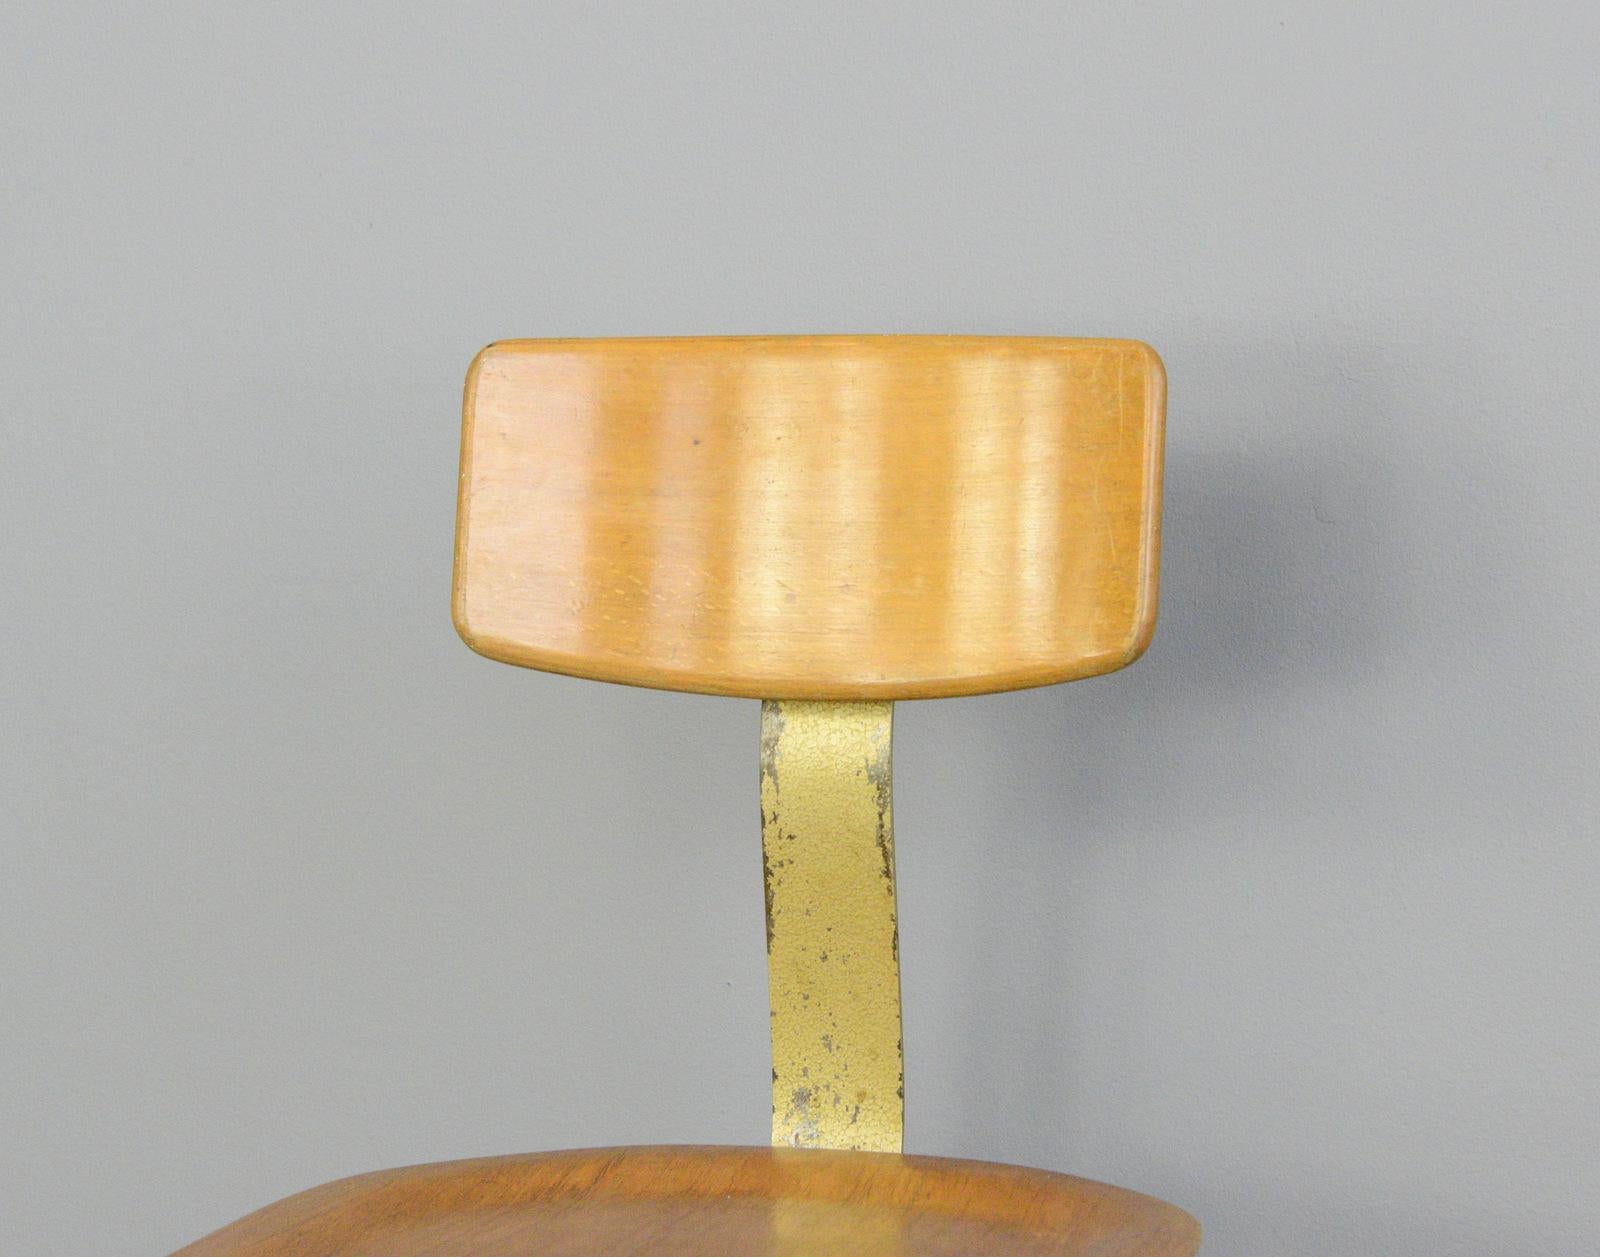 German Industrial Work Stool By Ama, circa 1930s For Sale